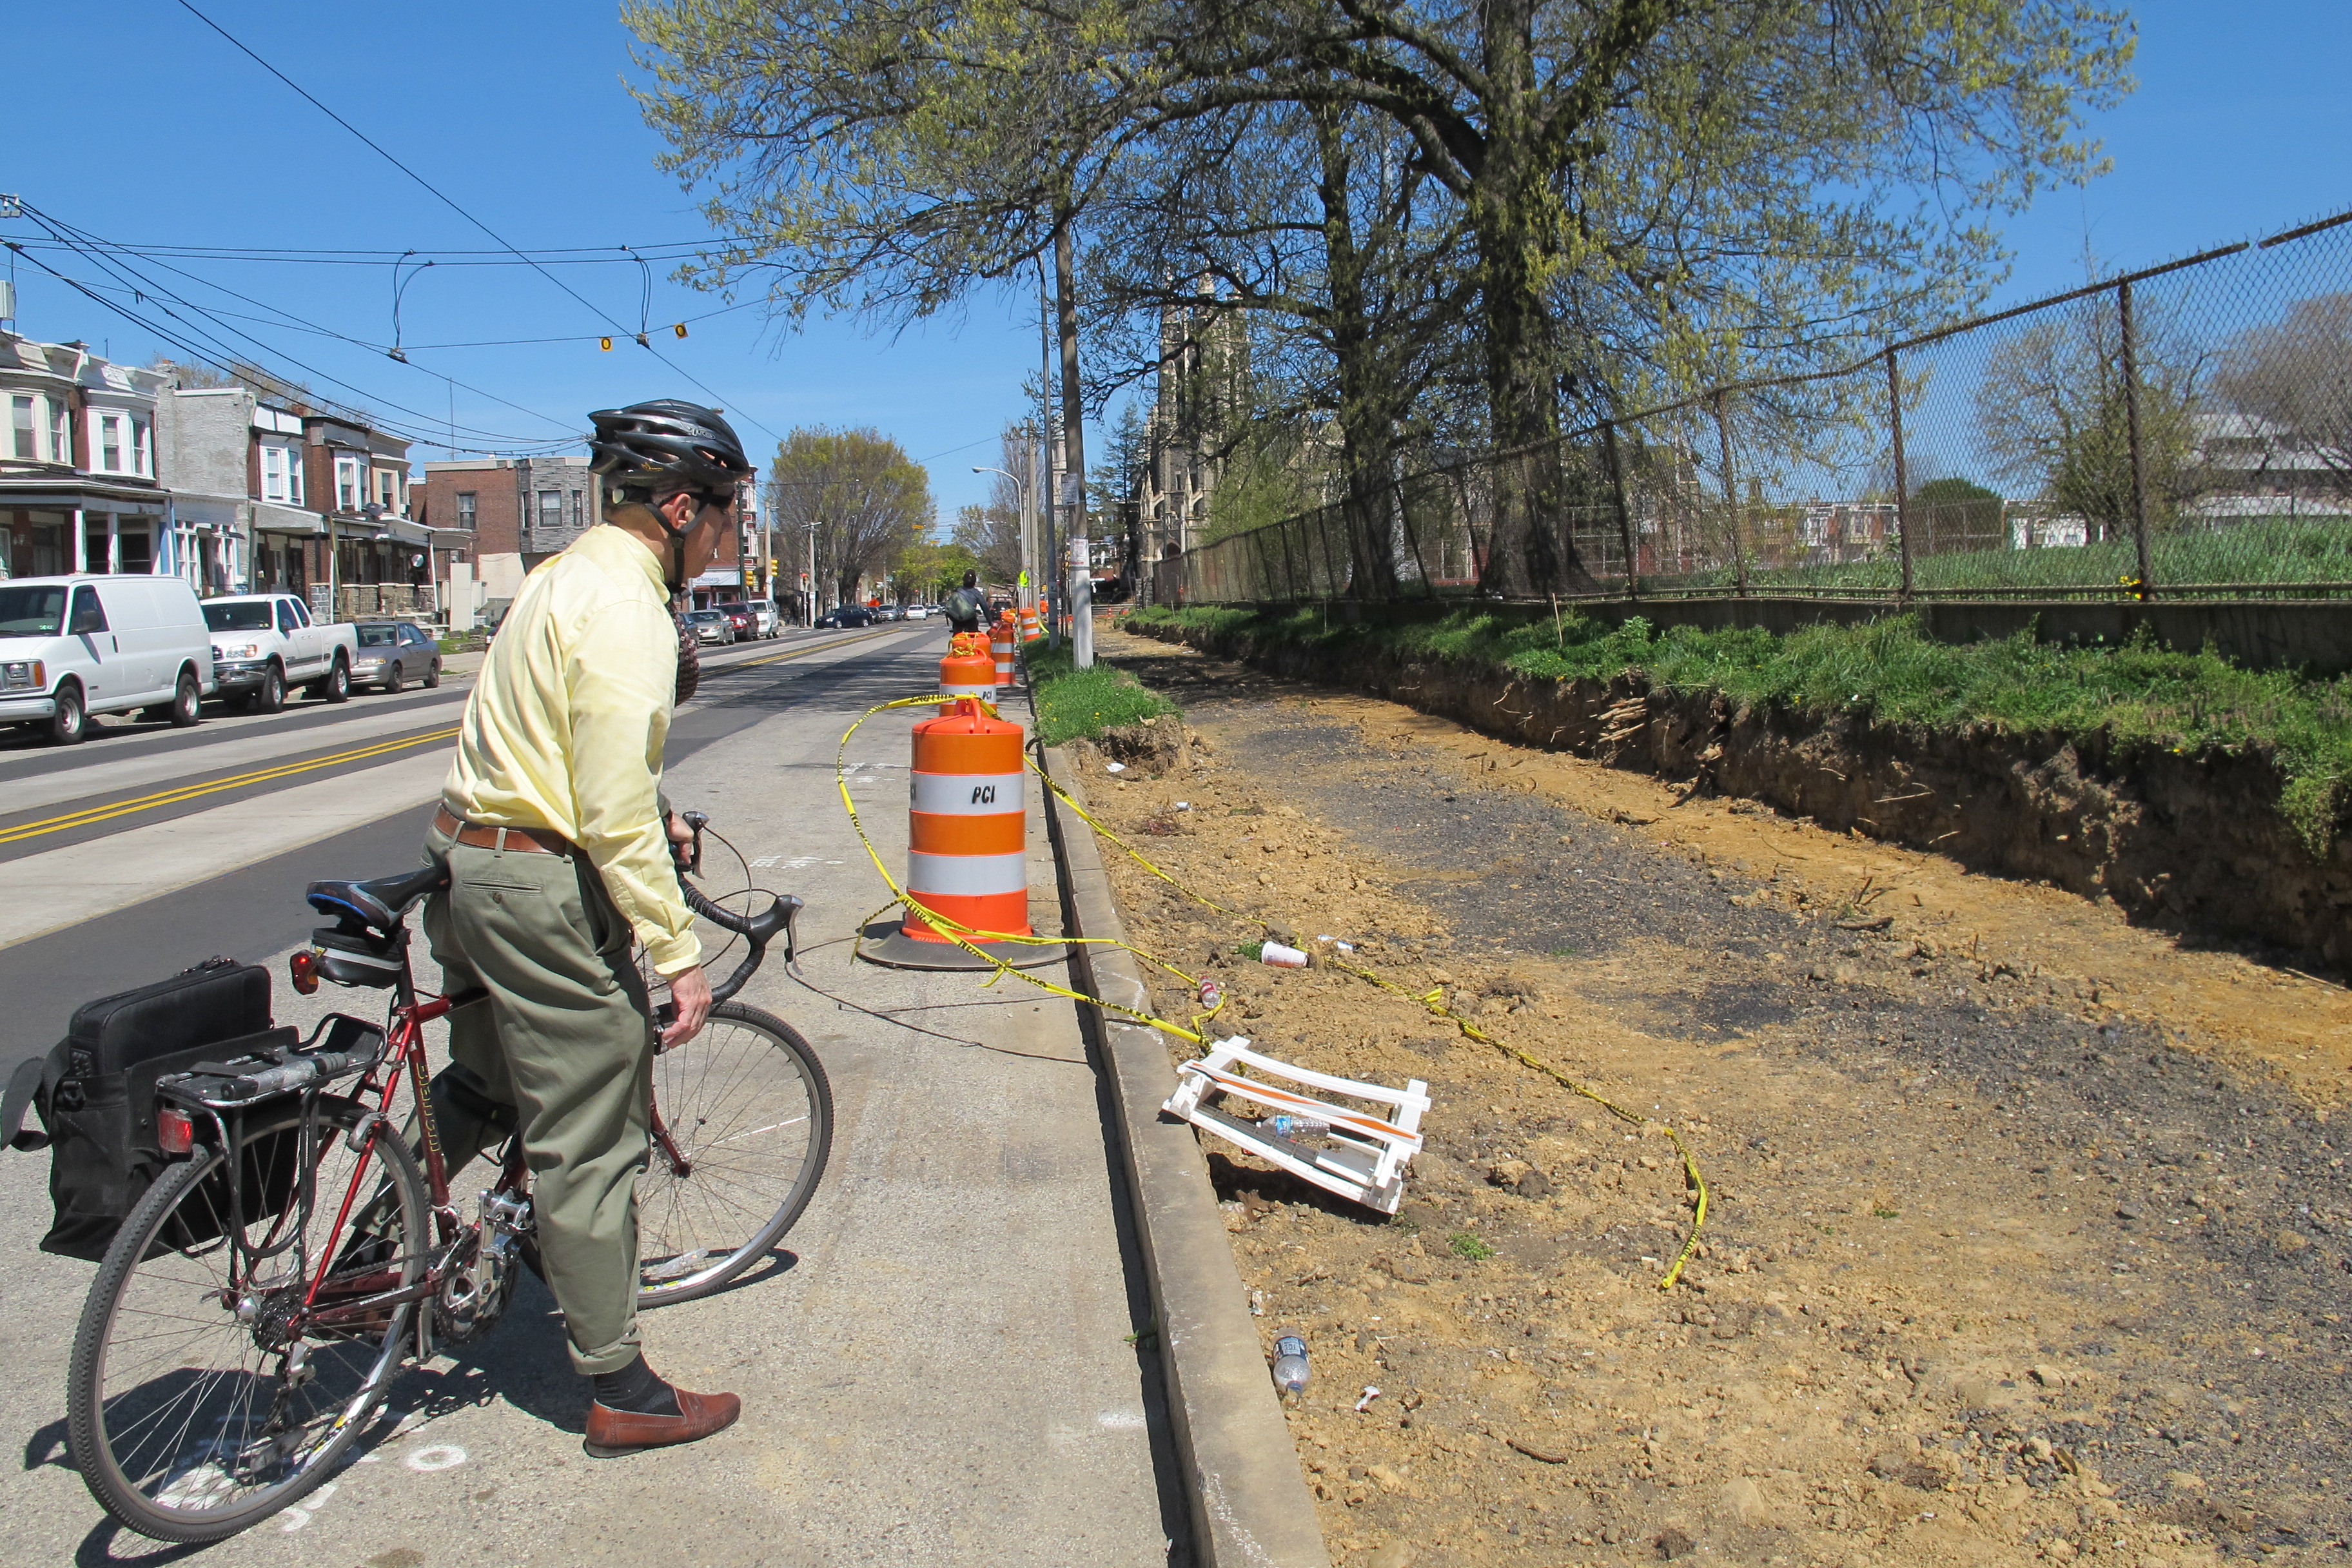 Charles looking at the greenway under construction along Chester Avenue.